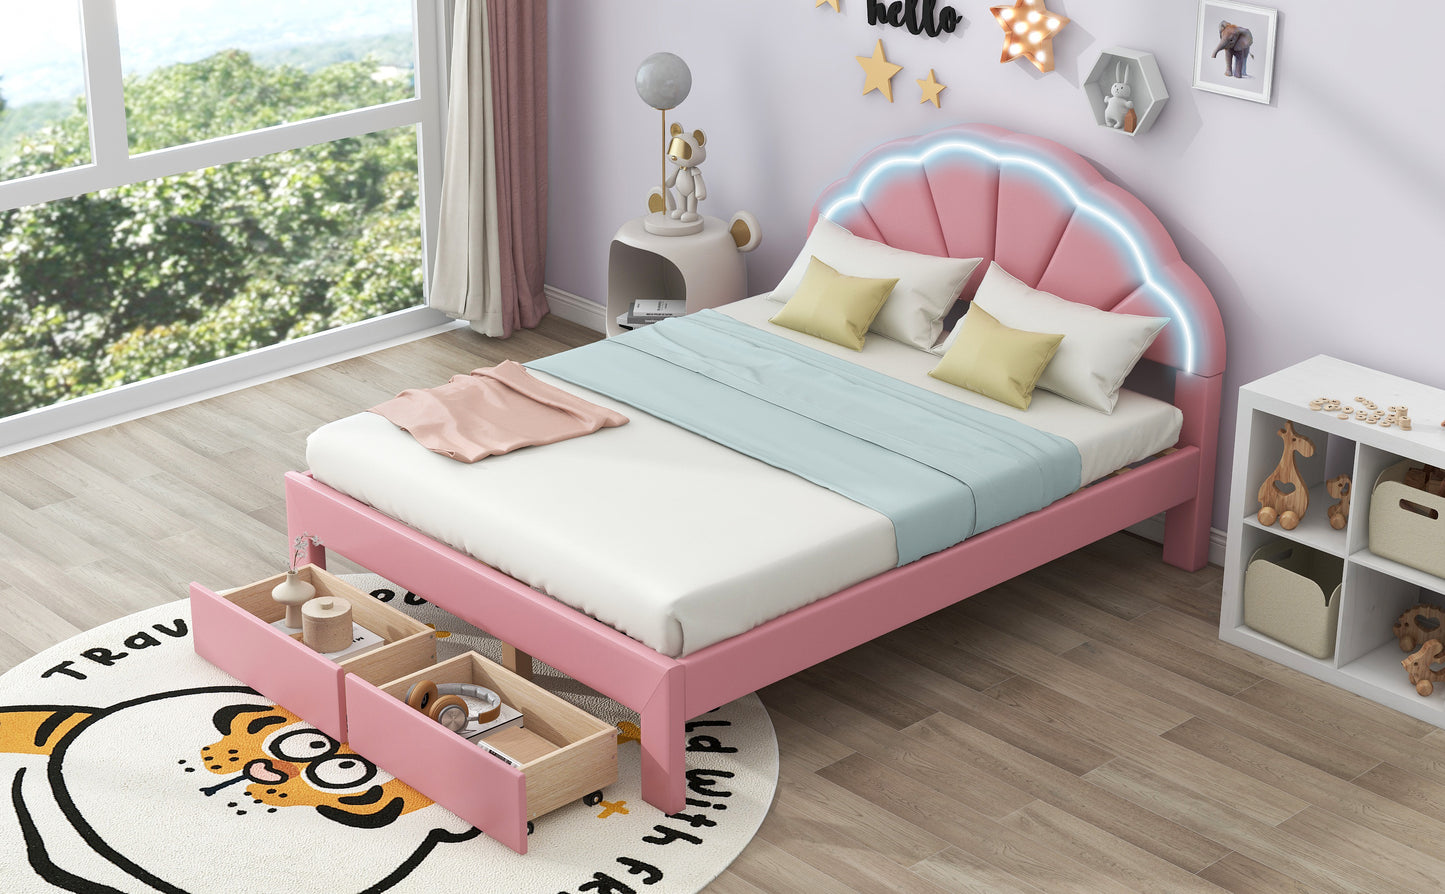 Queen Size Upholstered Platform Bed with Seashell Shaped Headboard, LED and 2 Drawers, Pink